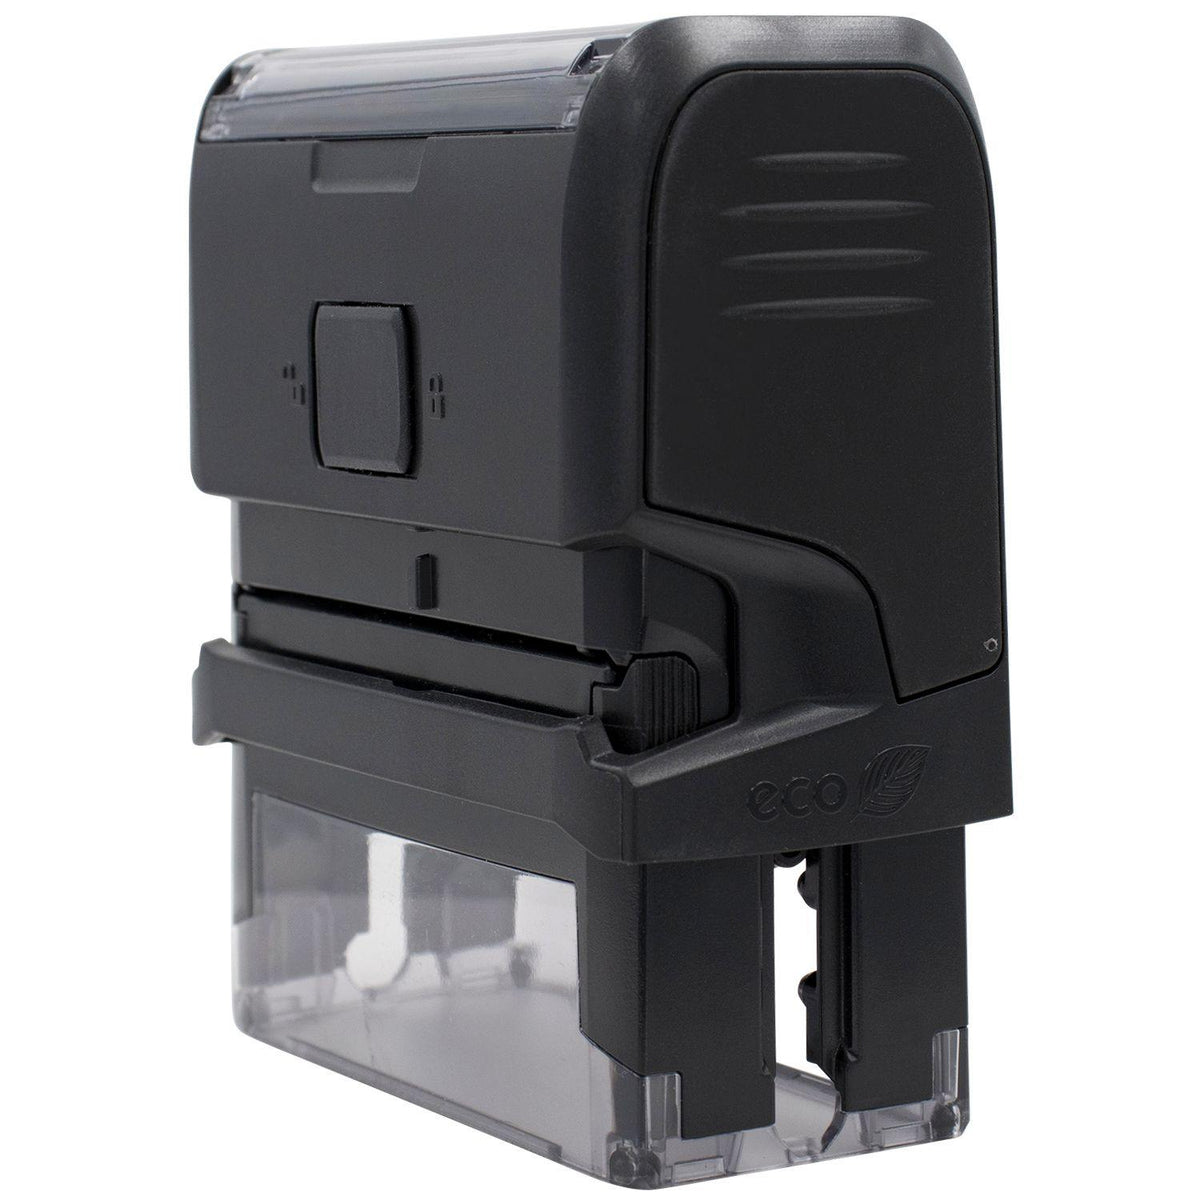 Side View of Large Self-Inking Benefits Assigned Stamp at an Angle